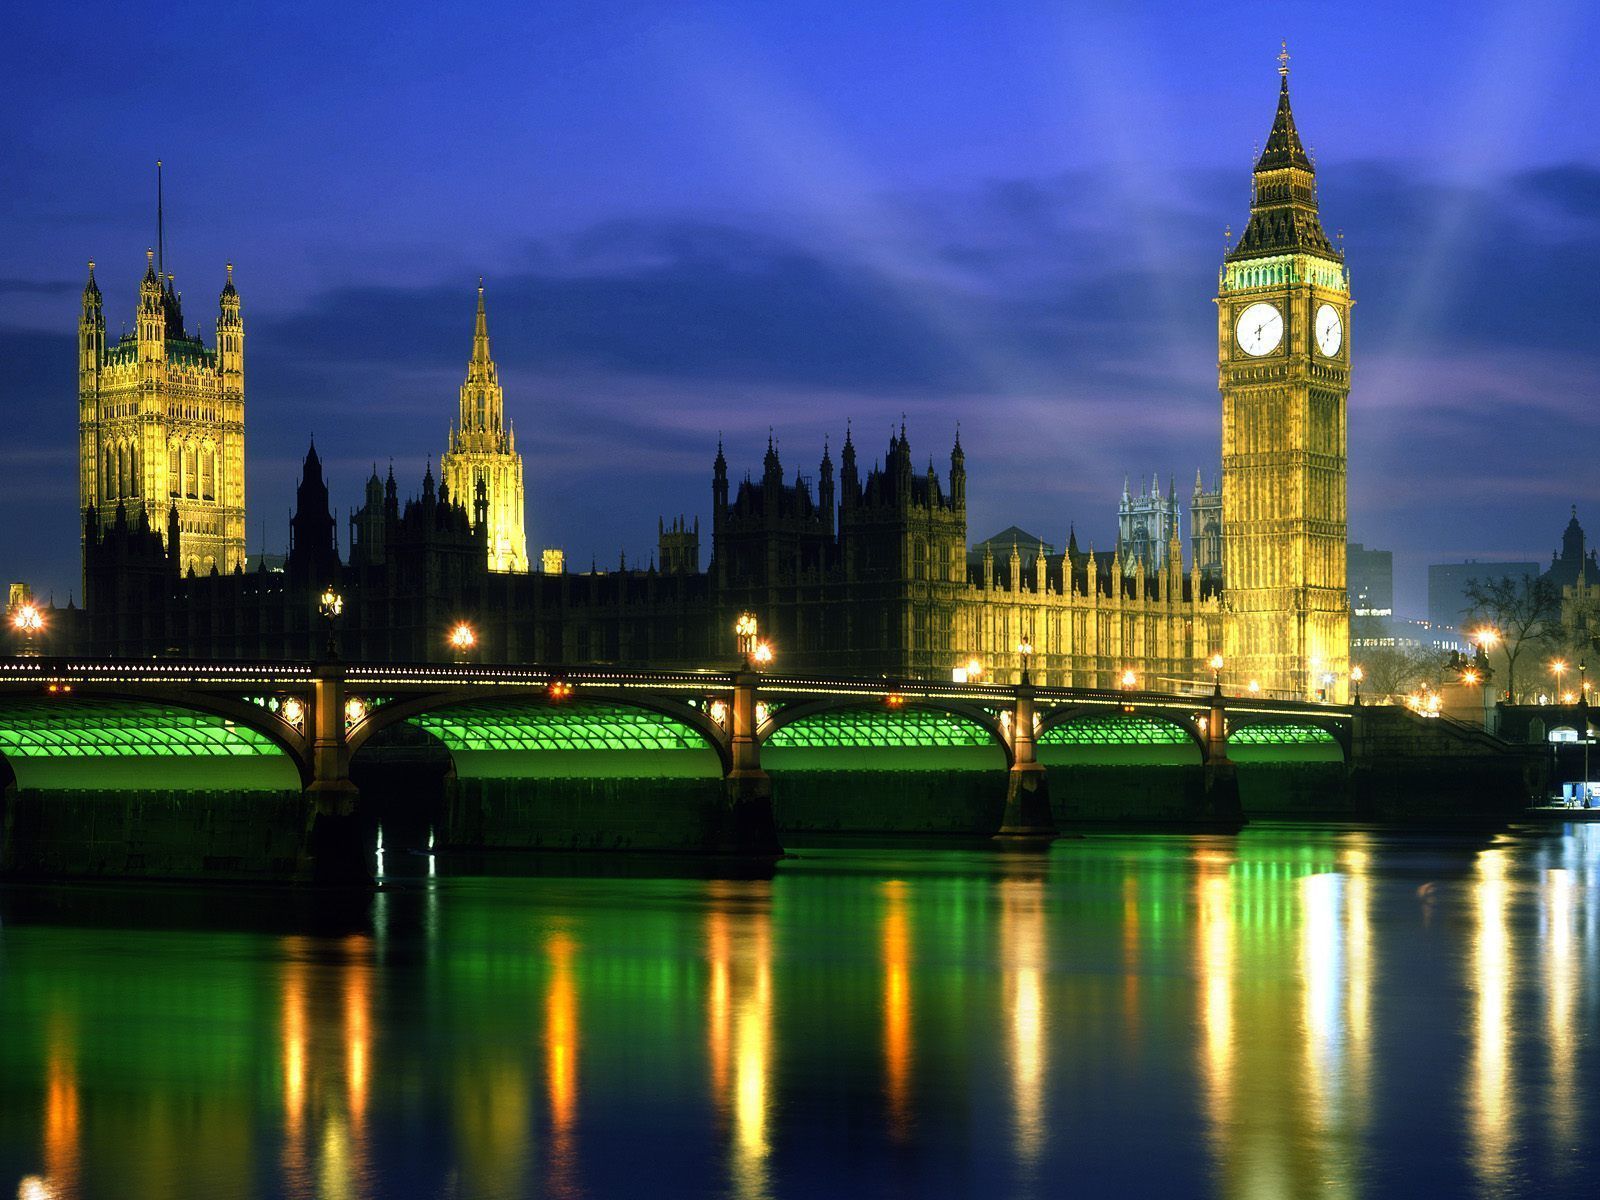 Known places: Palace Of Westminster At Night, London, England, picture nr. 47074